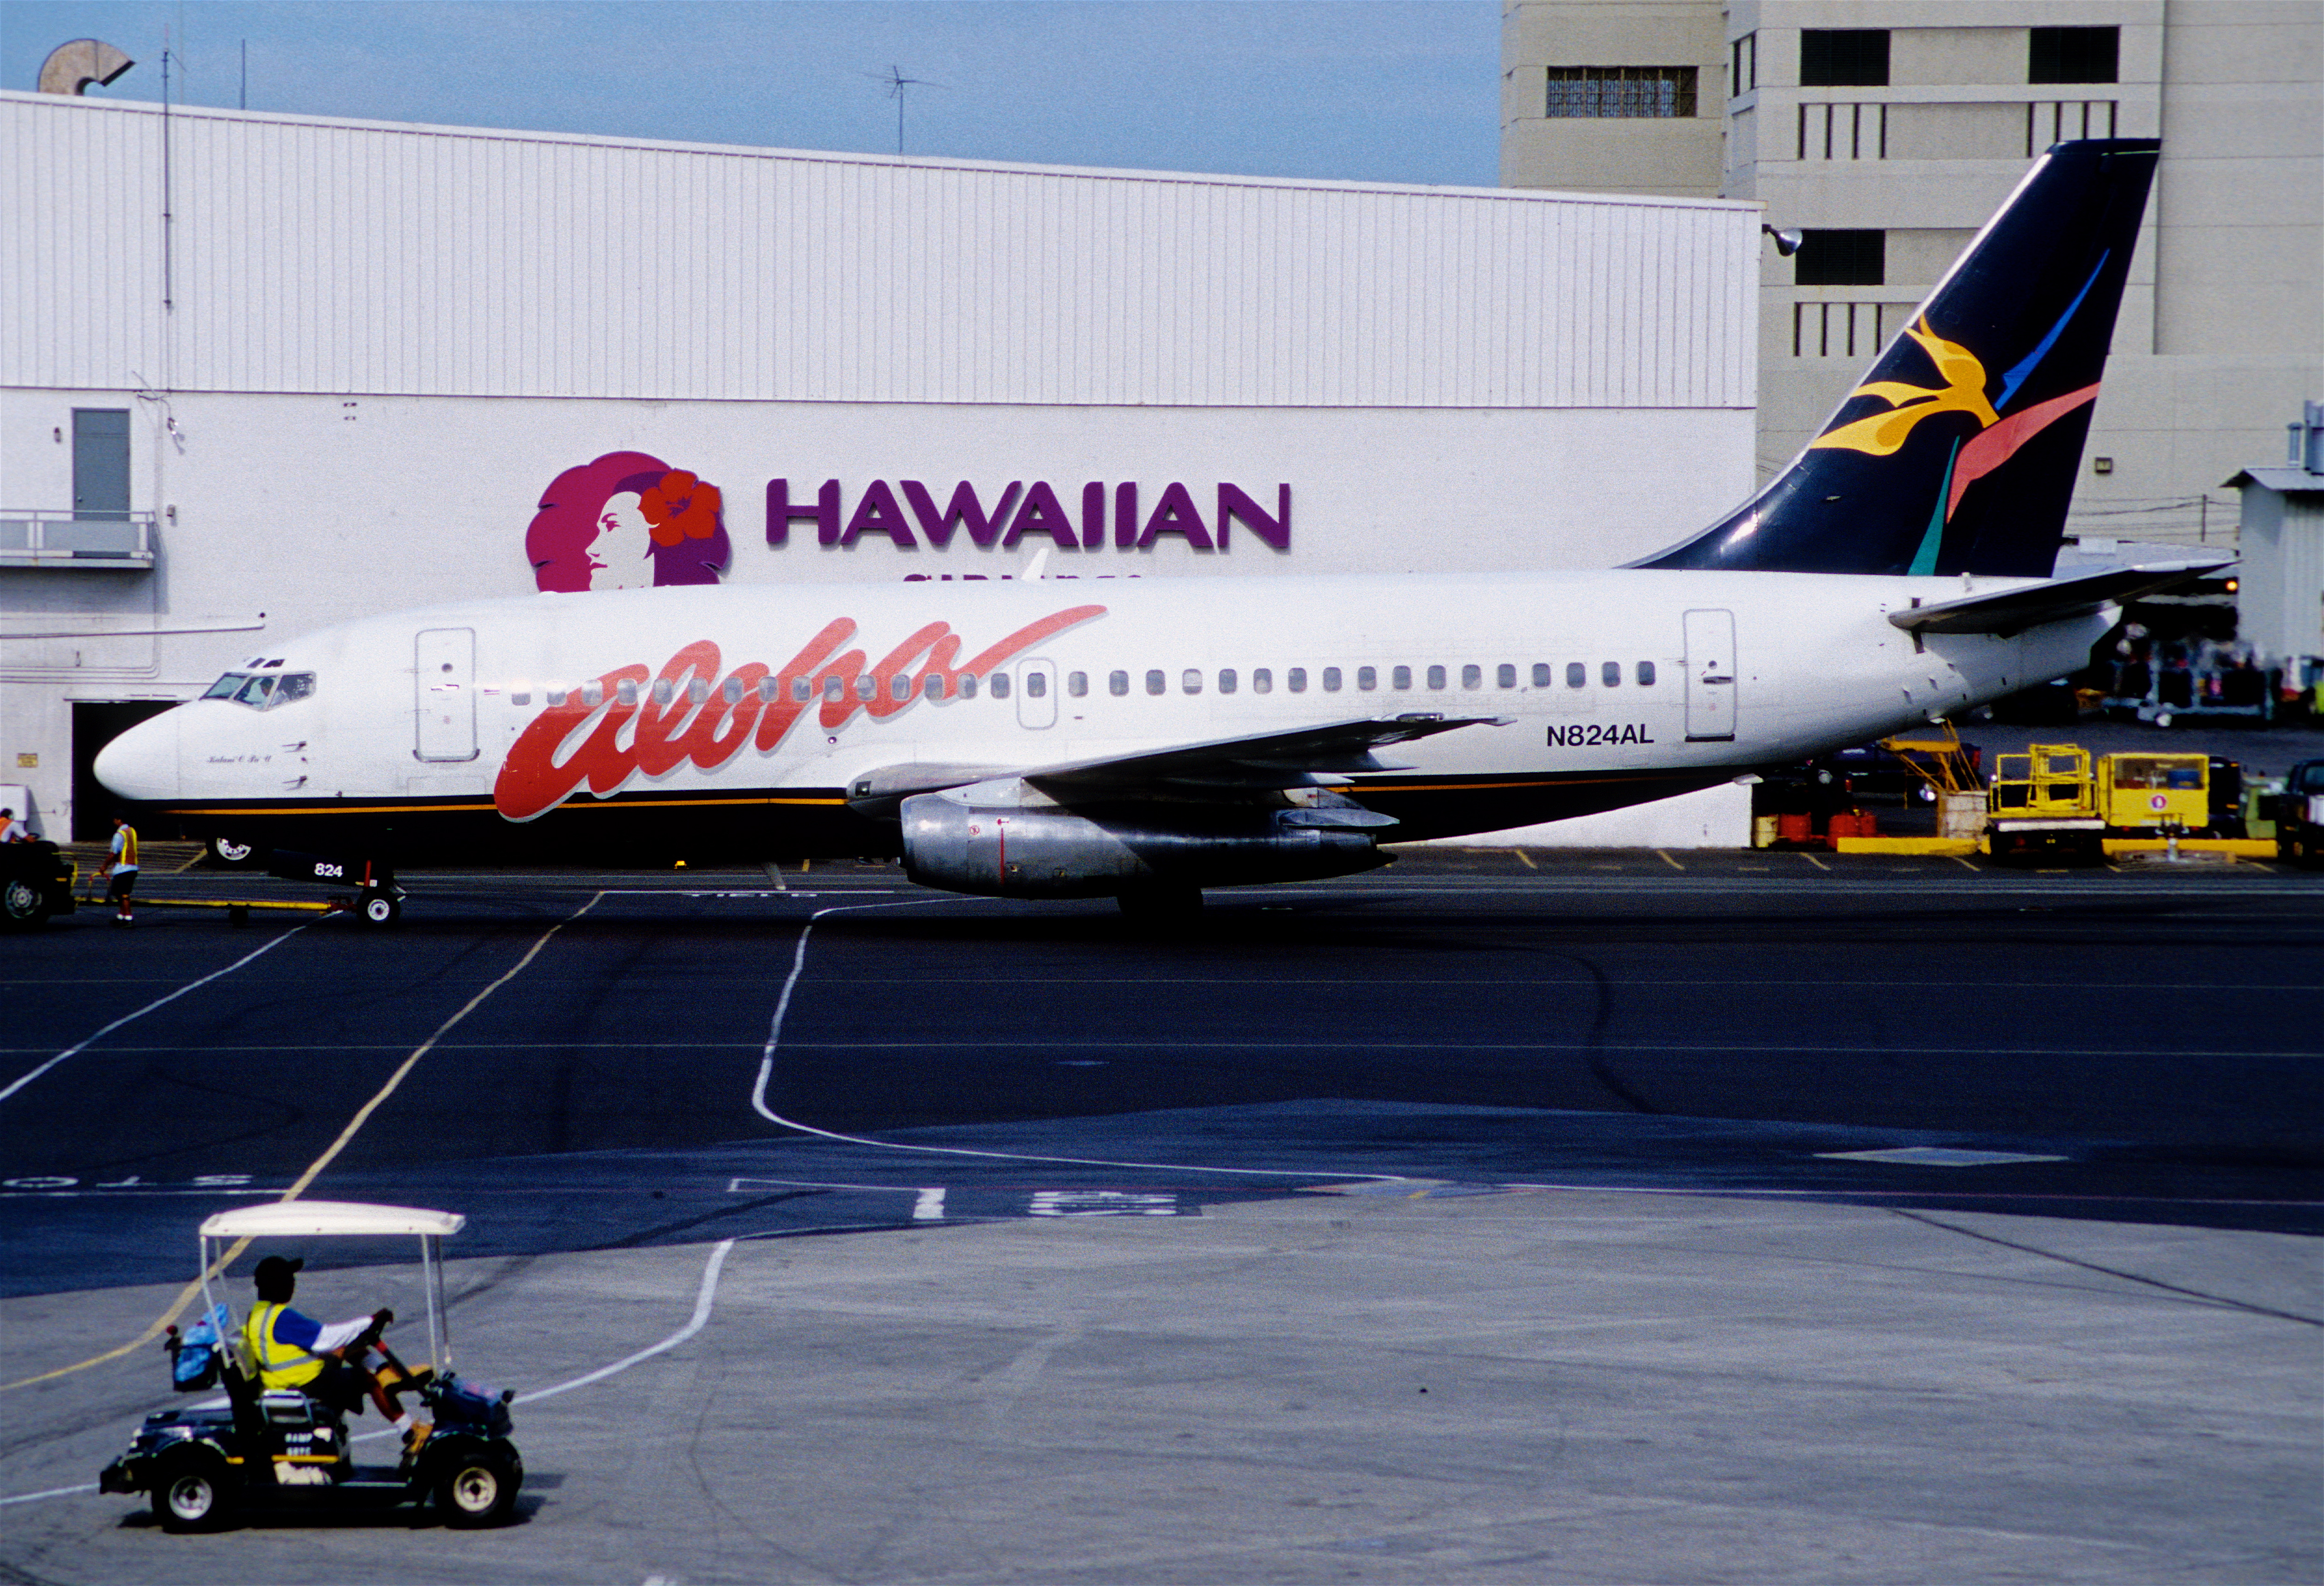 Commons:A. 425ah - Aloha Airlines Boeing 737-282; N824AL@HNL;01.10.2006 (49...